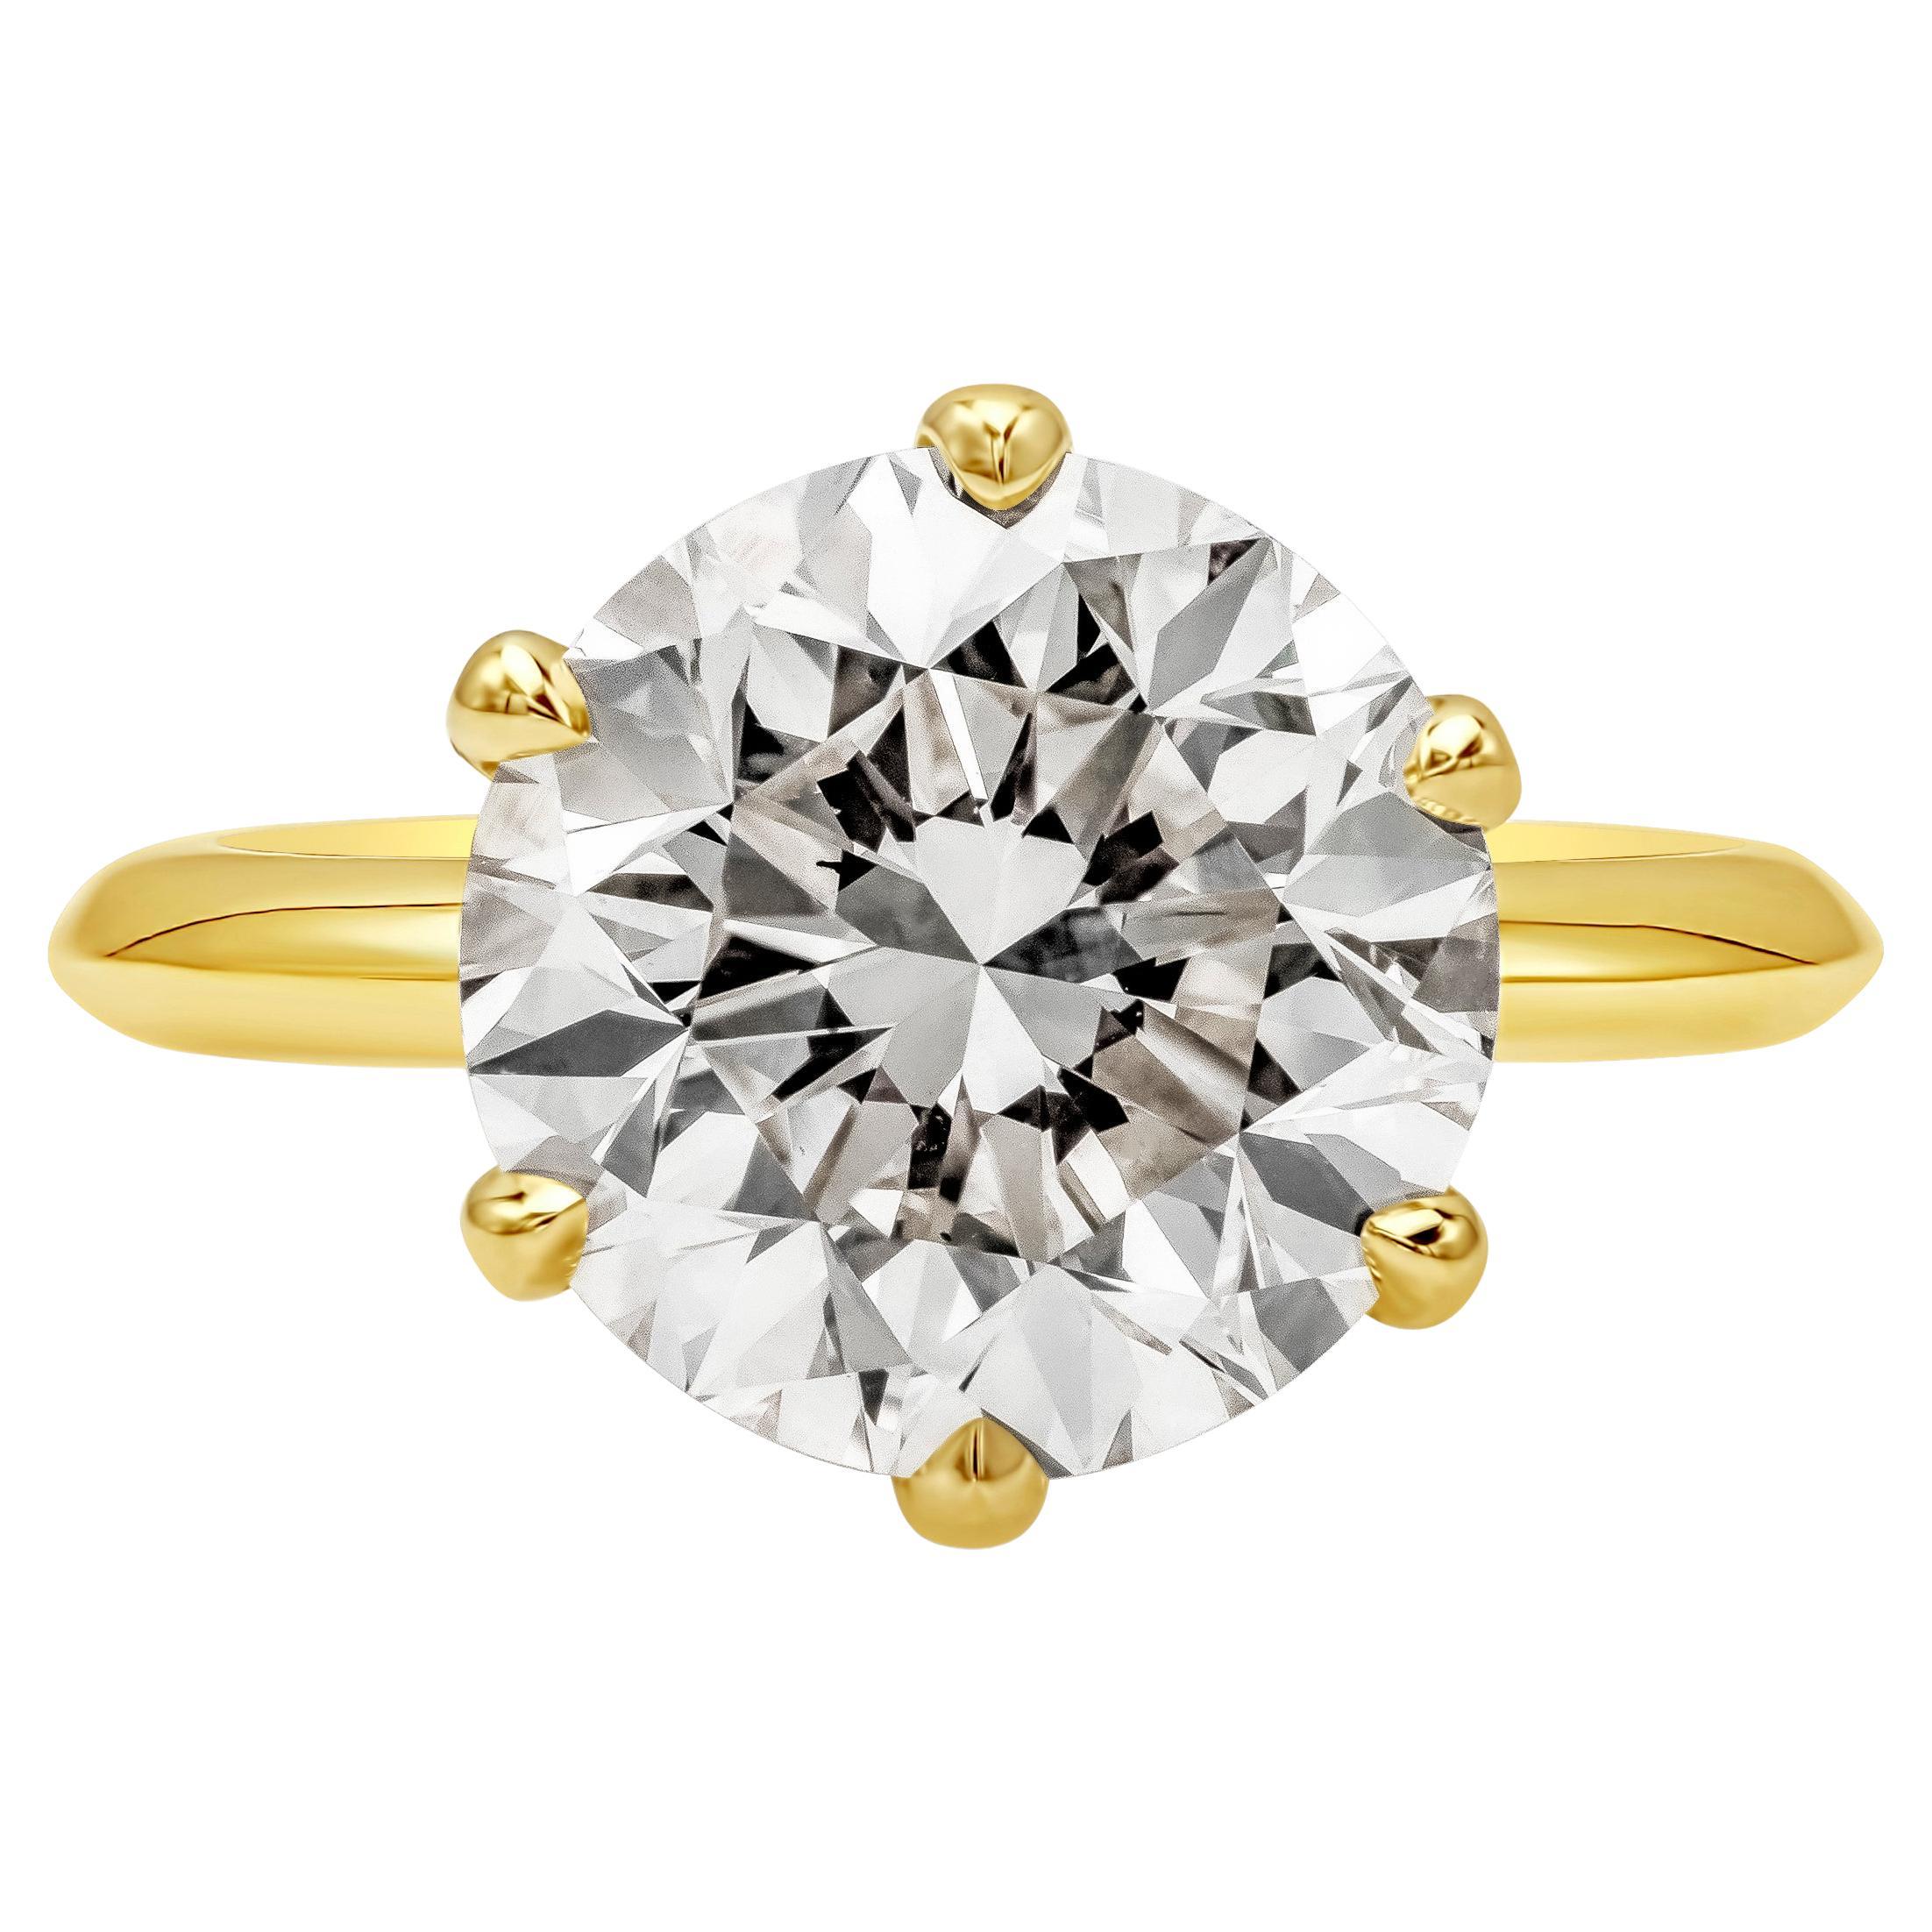 Roman Malakov GIA Certified 5.48 Carat Round Diamond Solitaire Engagement Ring For Sale